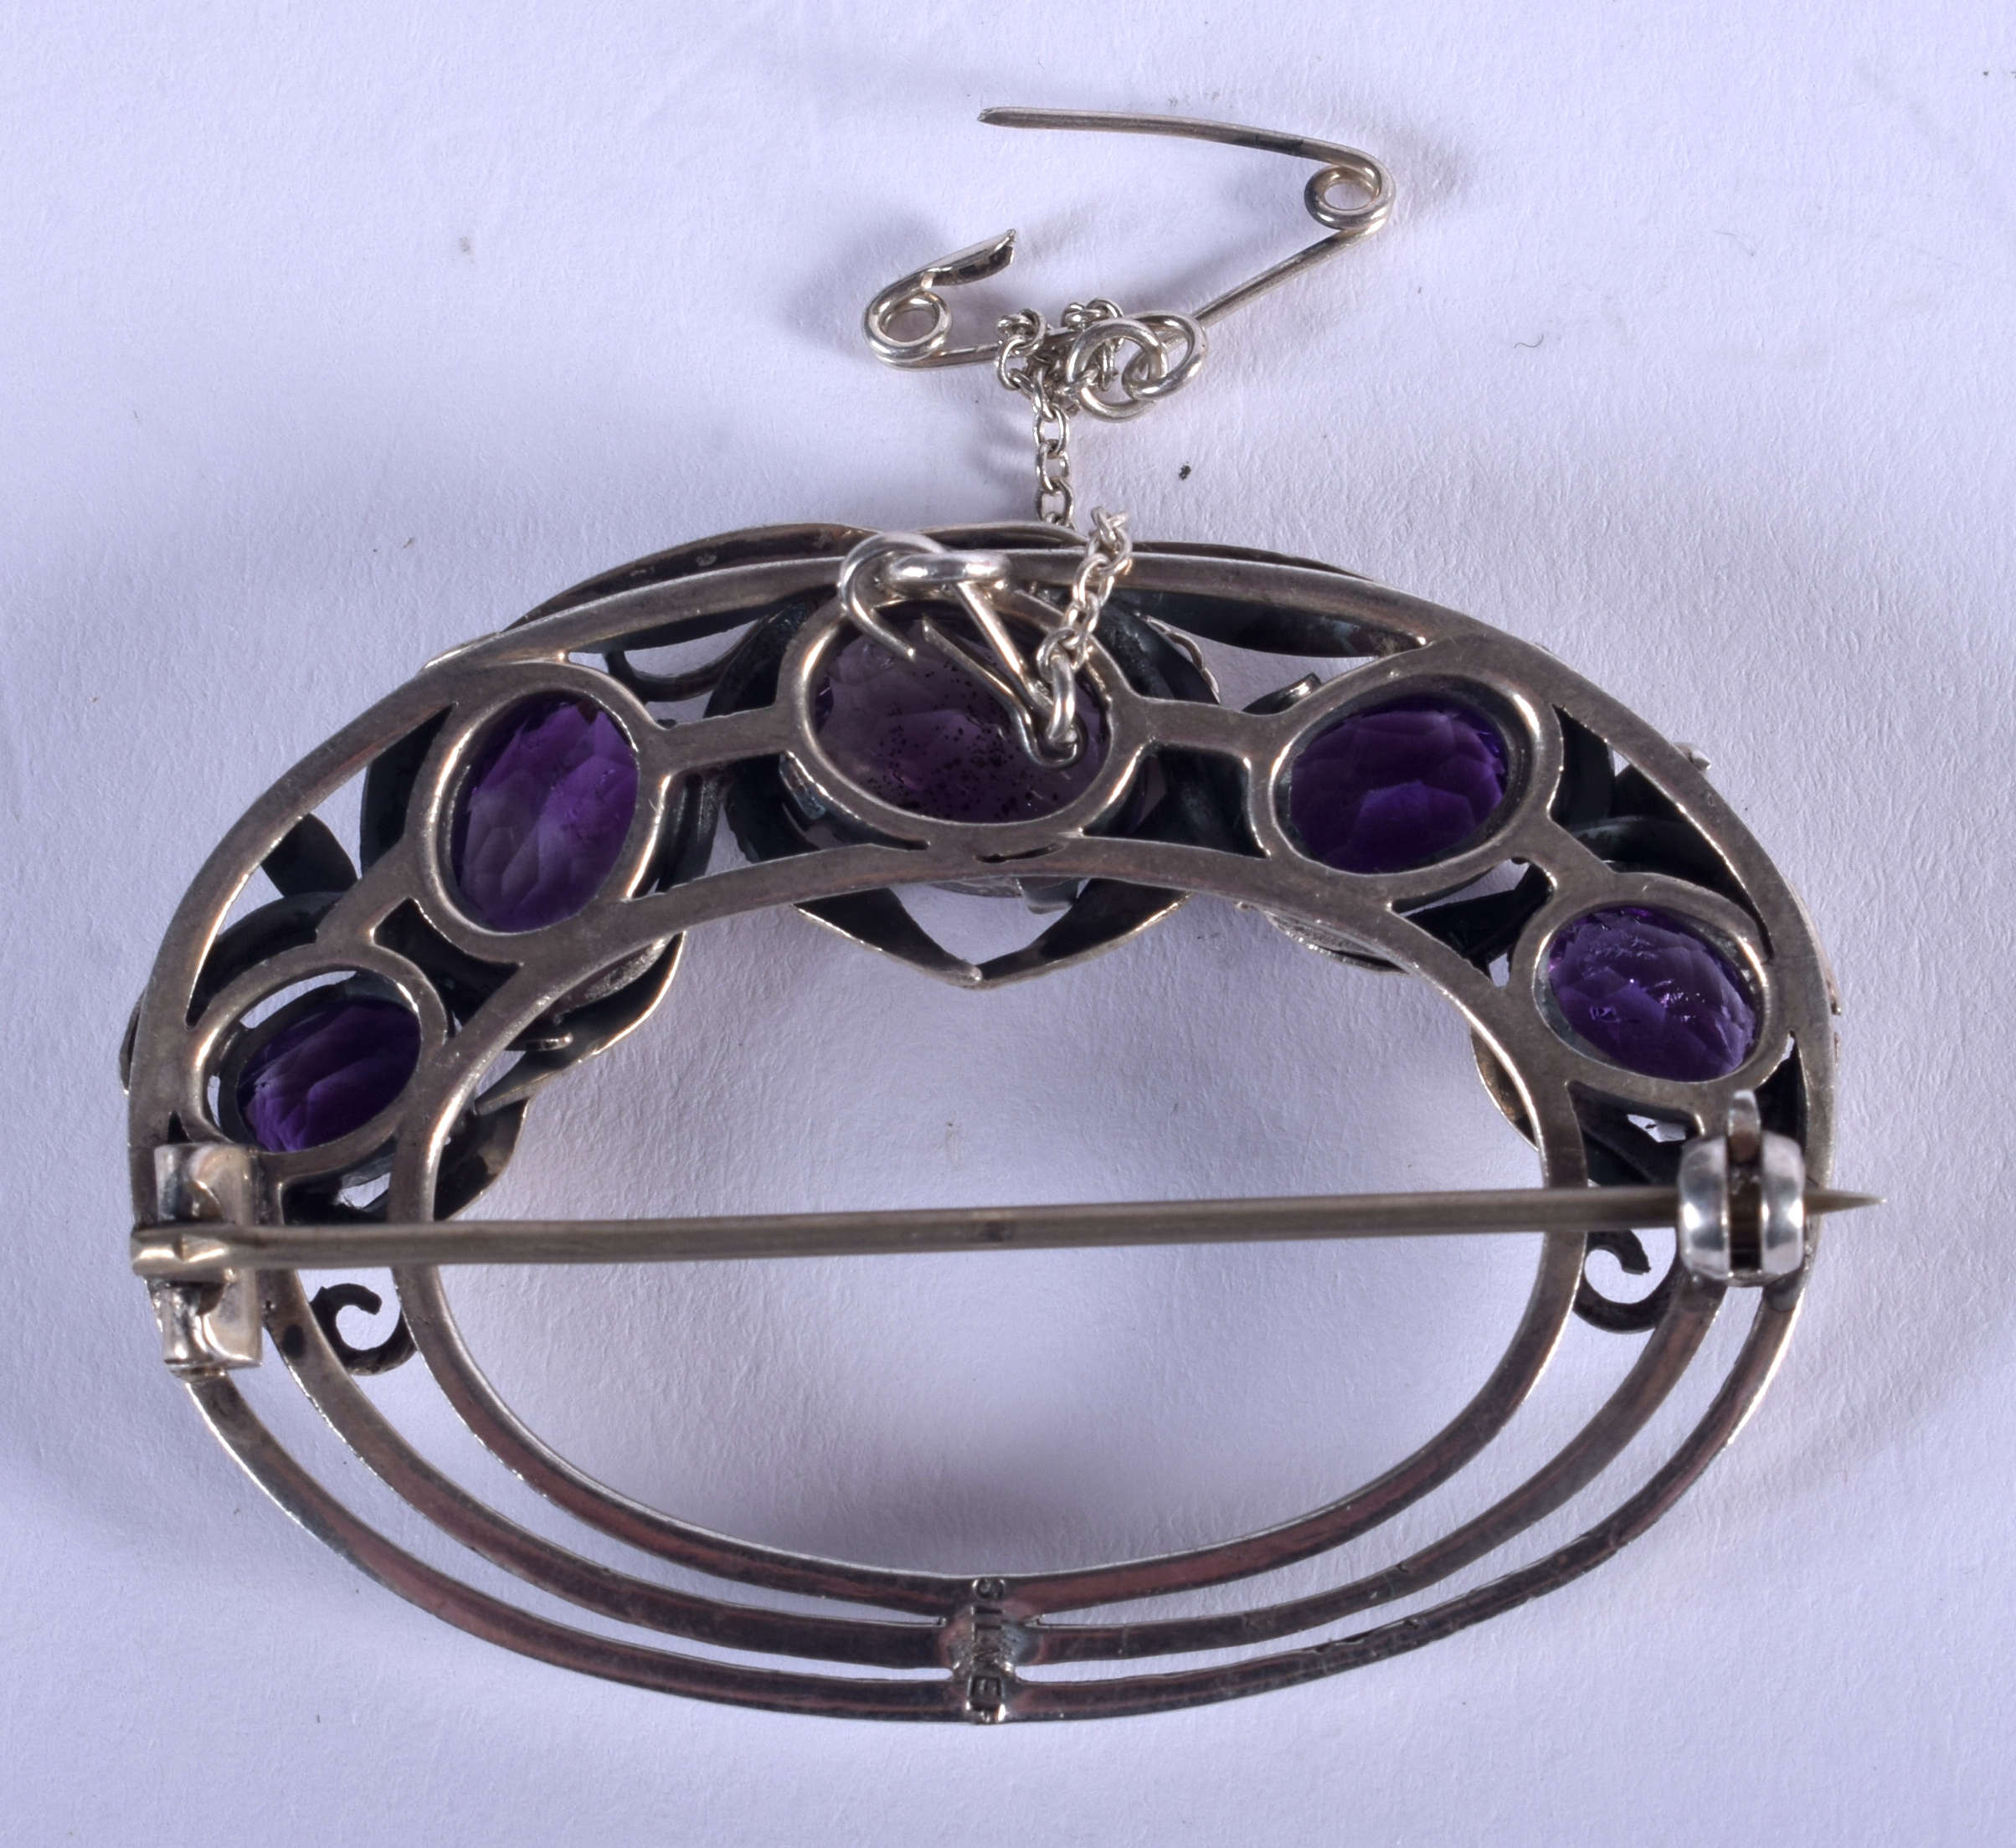 A VINTAGE SILVER AND AMETHYST BROOCH. 12 grams. 4.5 cm x 3.5 cm. - Image 2 of 2